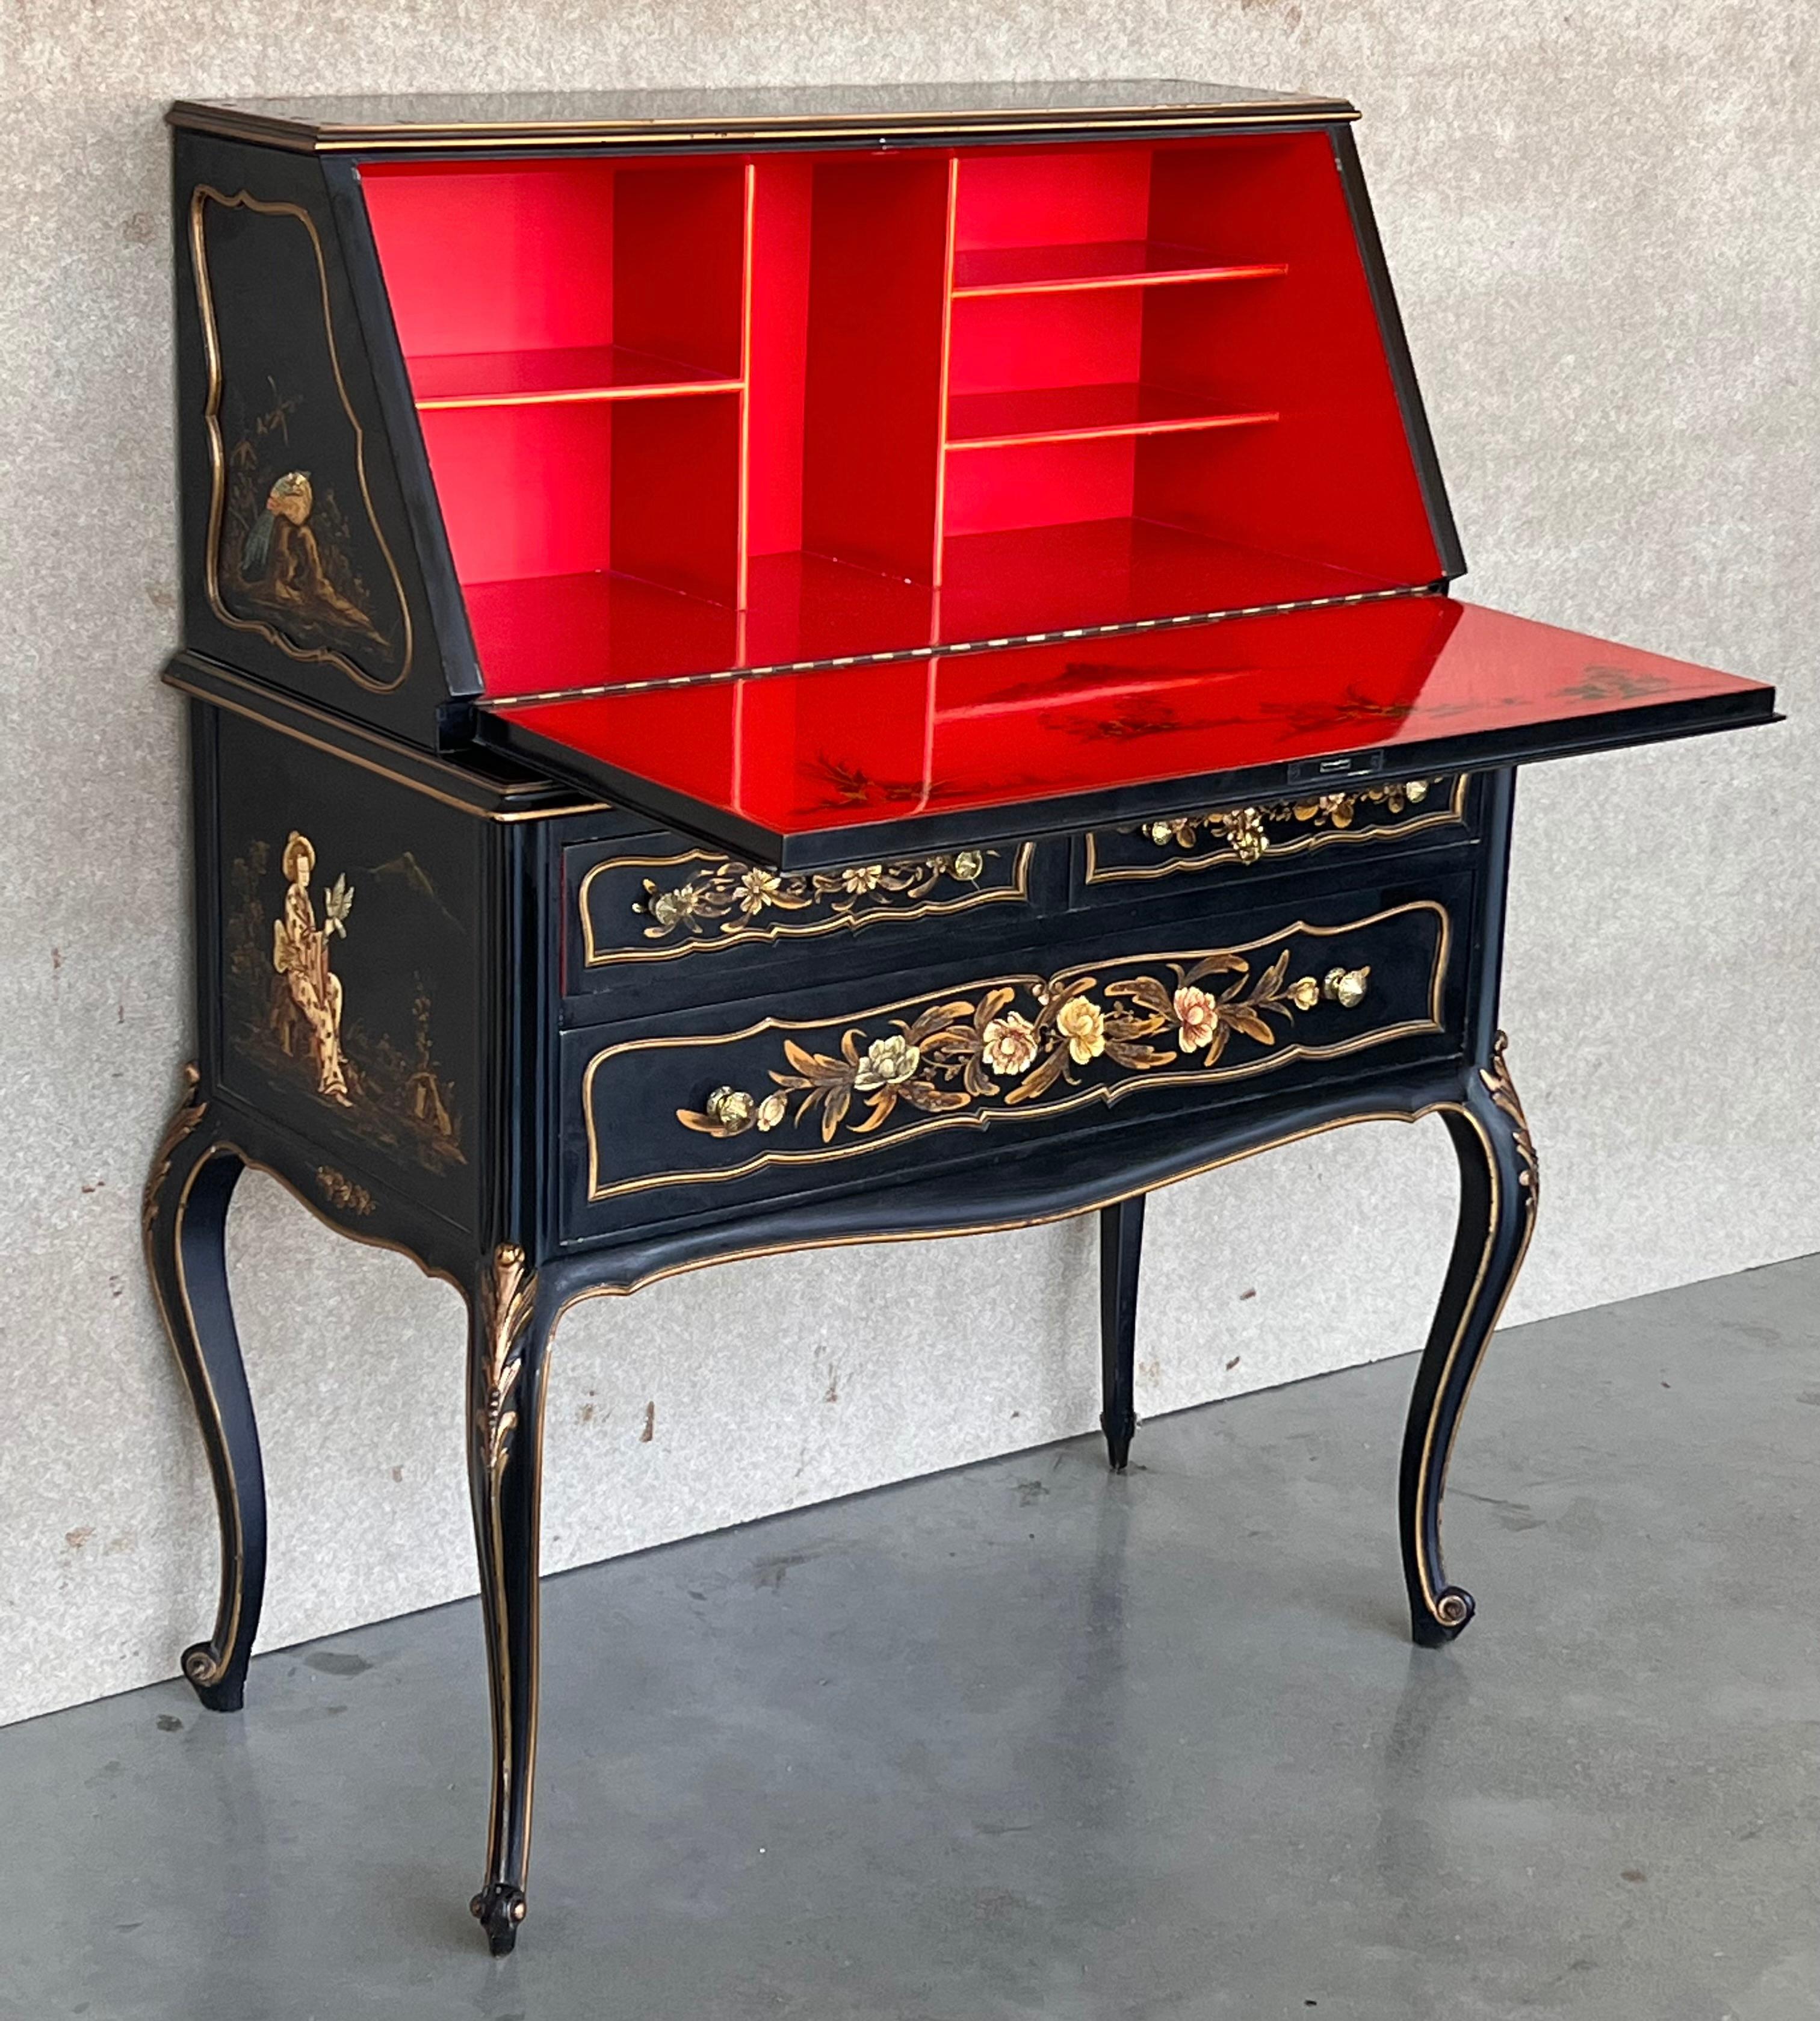 20th Century Chippendale Style Slant Top Desk in Black Lacquered Wood, circa 1900 For Sale